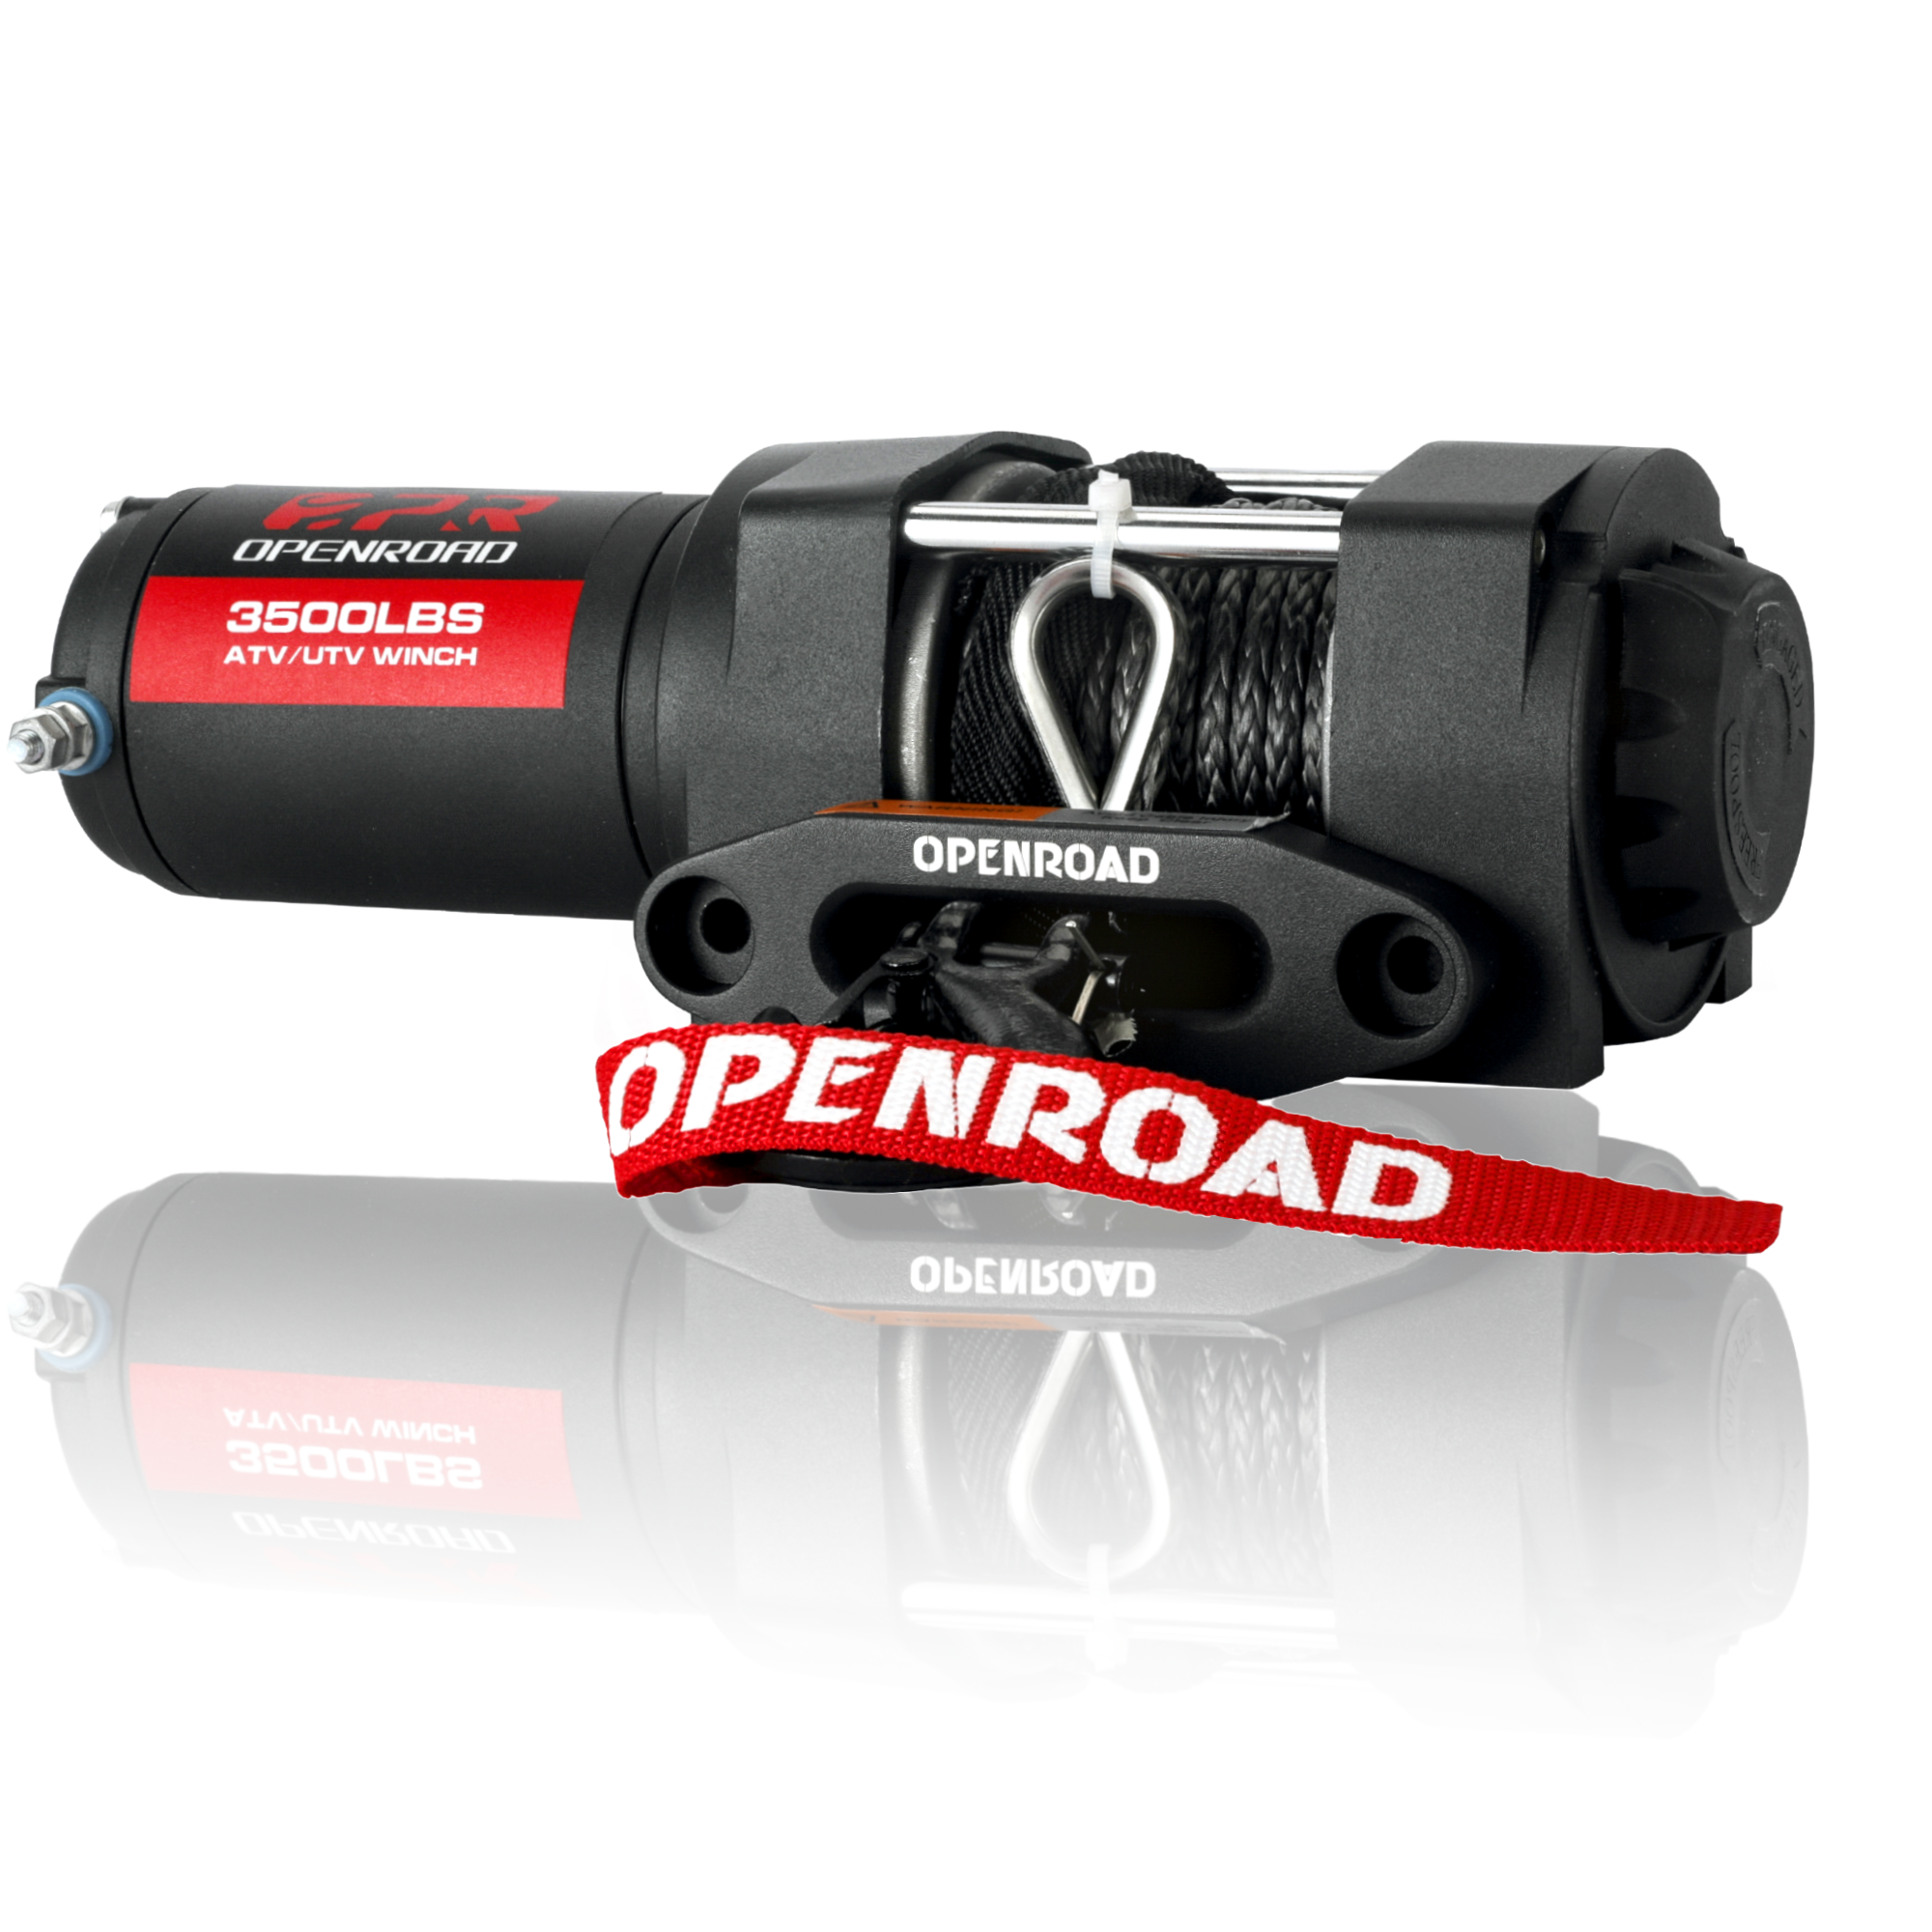 OPENROAD  3500Lbs 12 Volts Electric Winch for ATV/UTV winch OPENROAD   